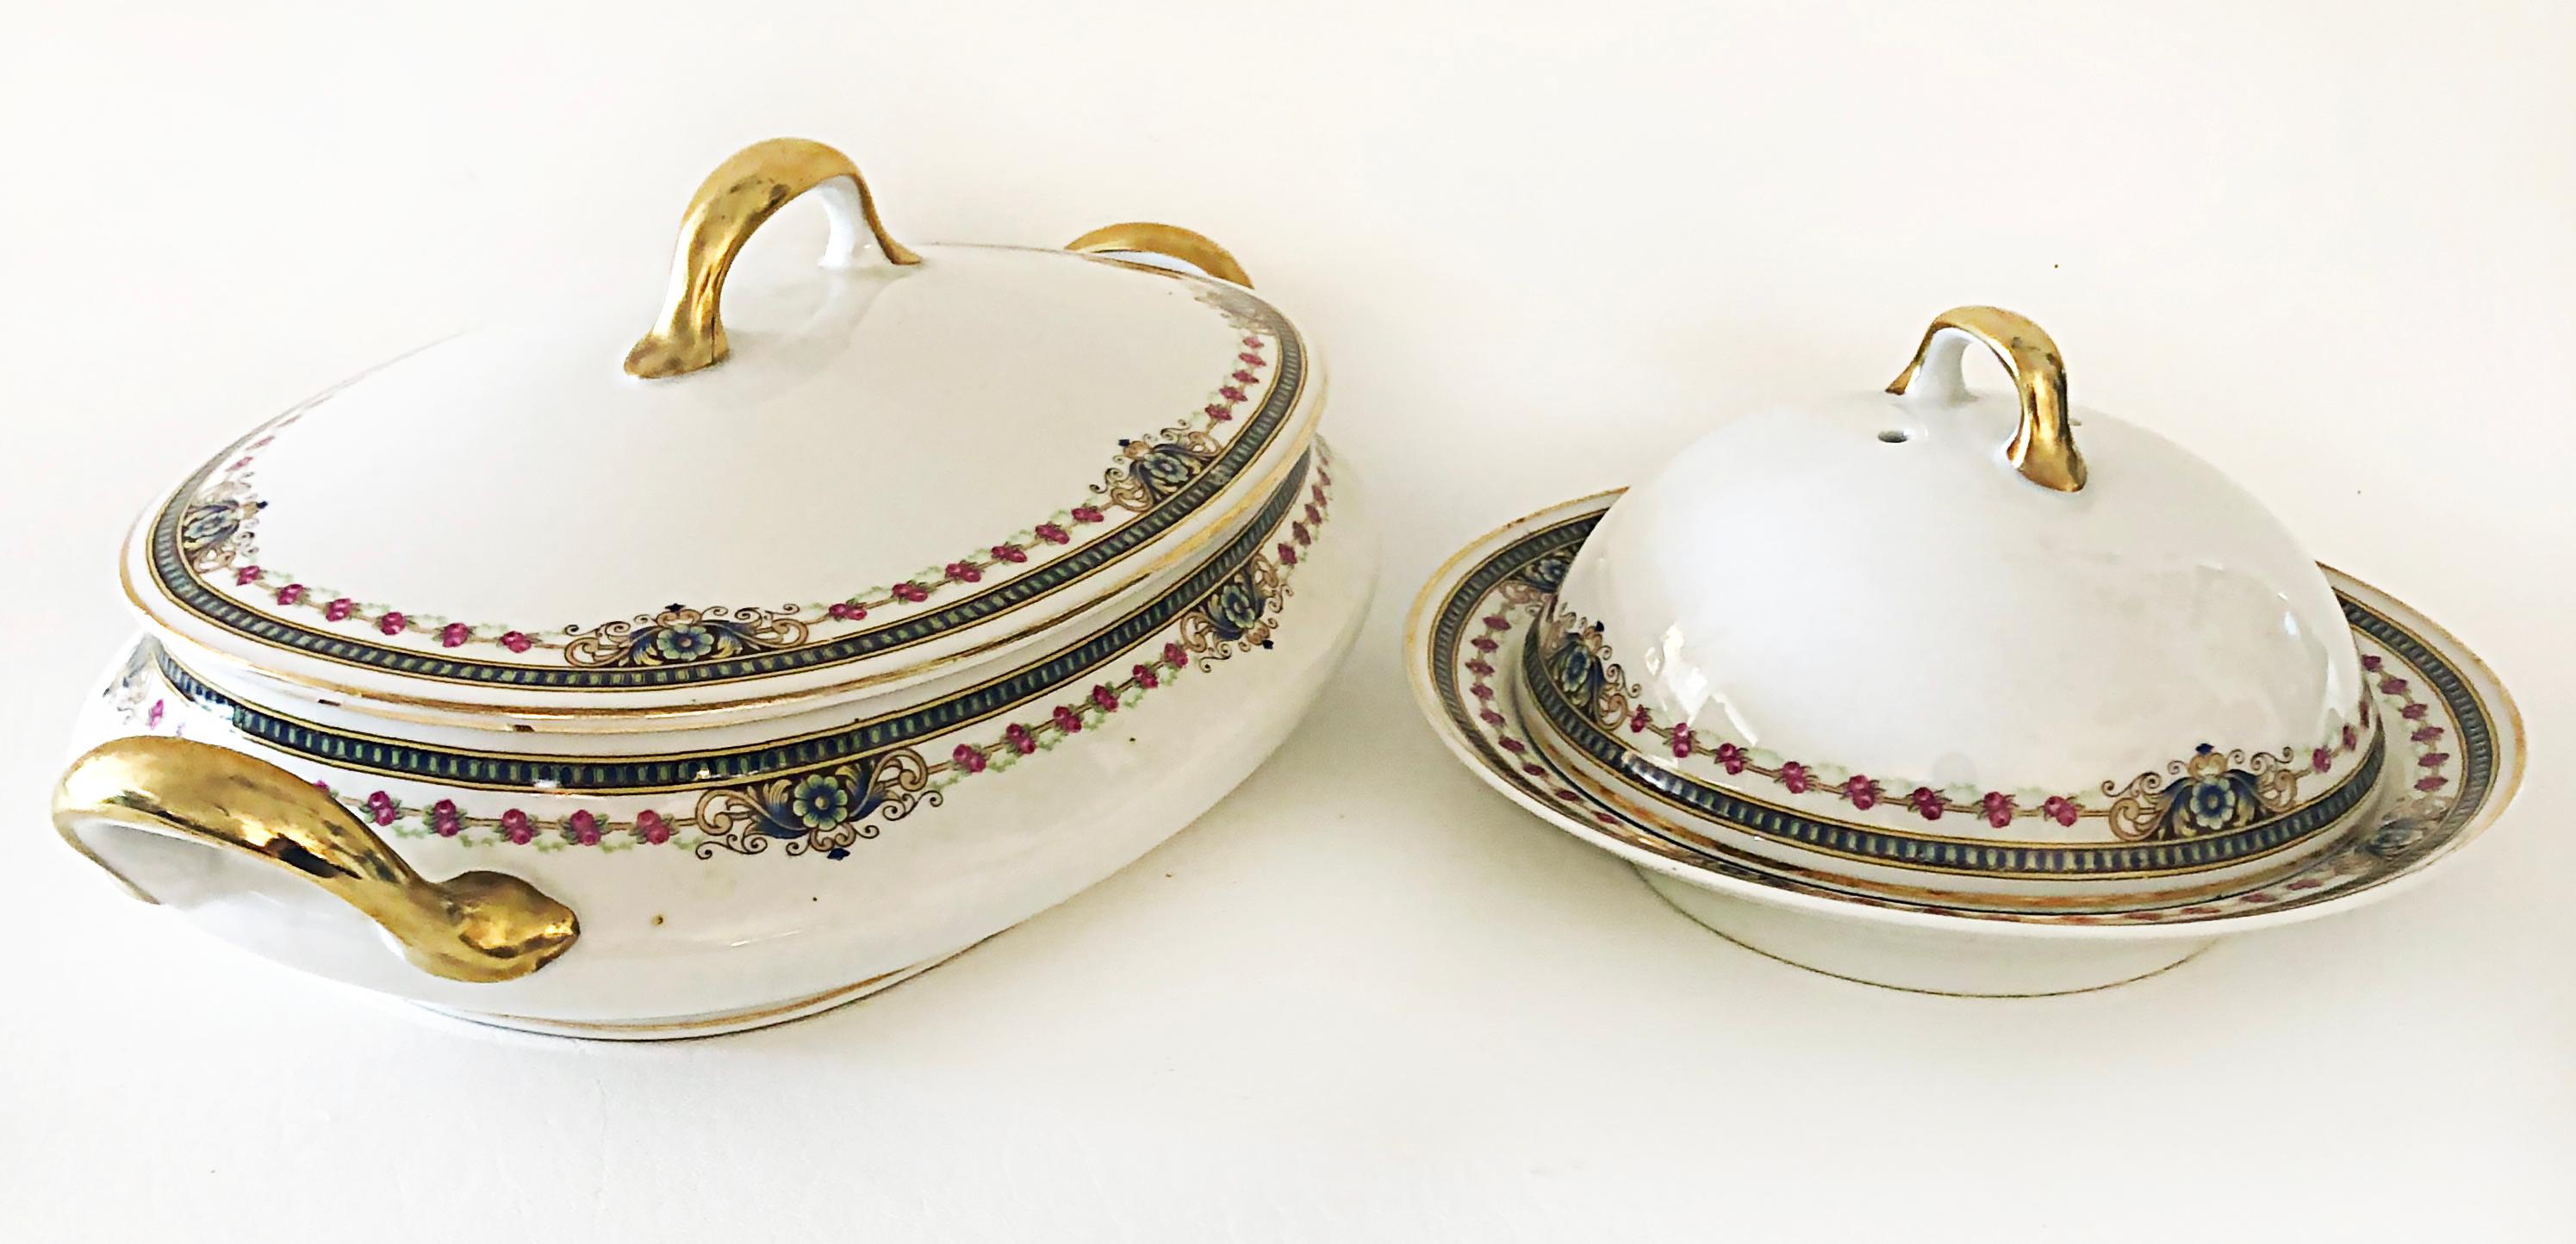 Limoges France L. Bernardaud porcelain tureen & cheese keep with covers.

Offered for sale is a set of two covered Limoges dishes from L. Bernardaud and
 Company. The set includes a covered tureen and a covered cheese keep. The pieces are marked